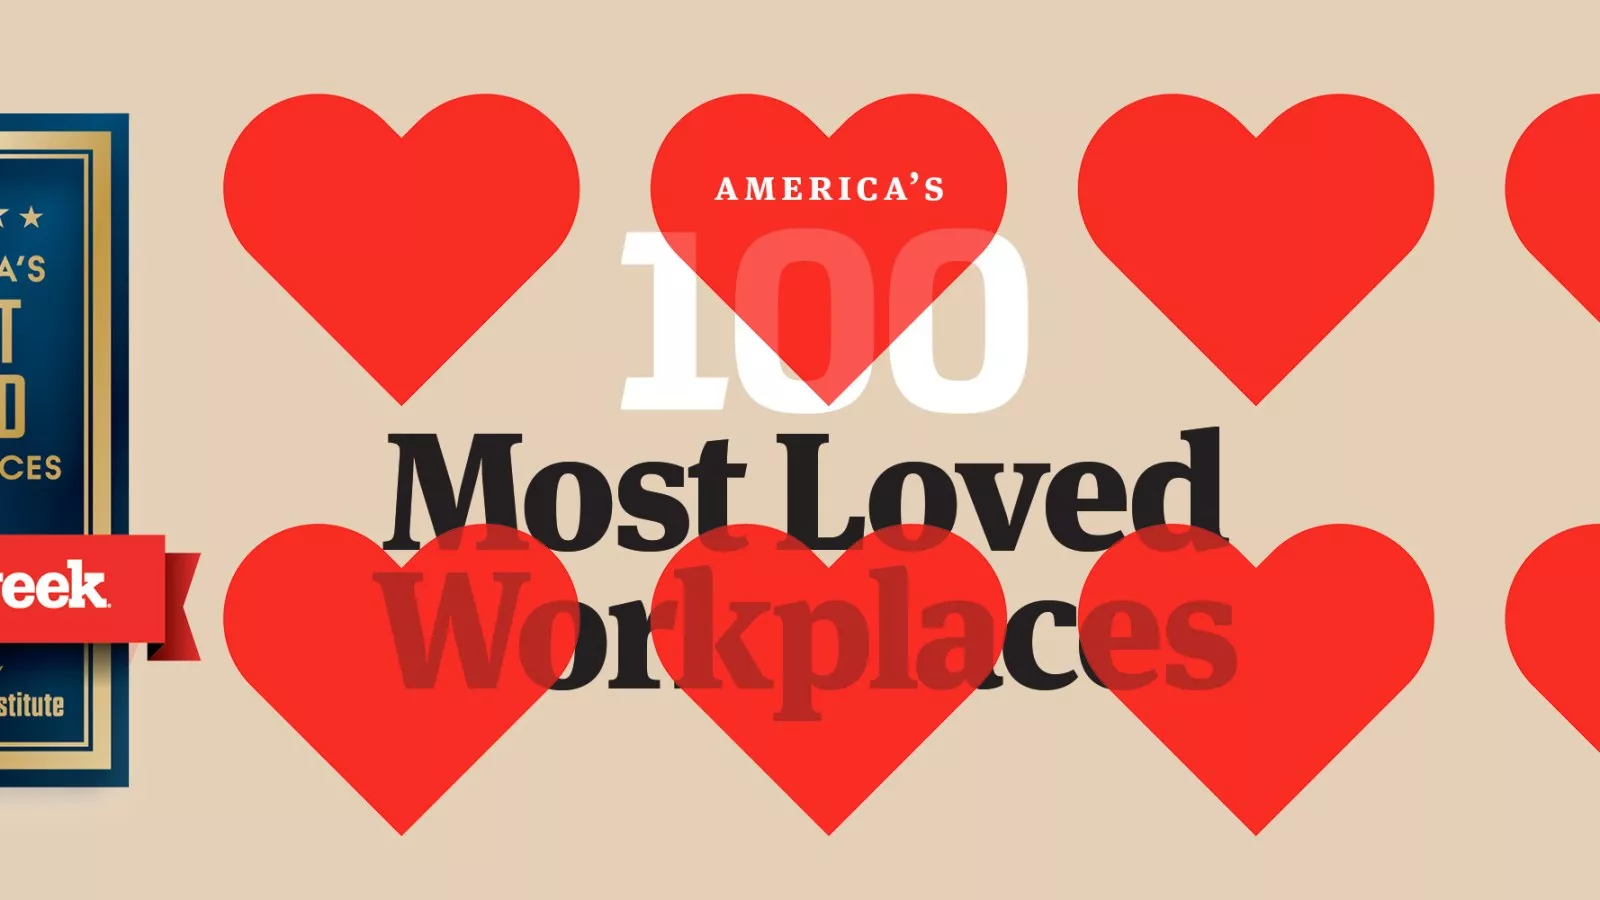 America's 100 Most Loved Workplaces 2022